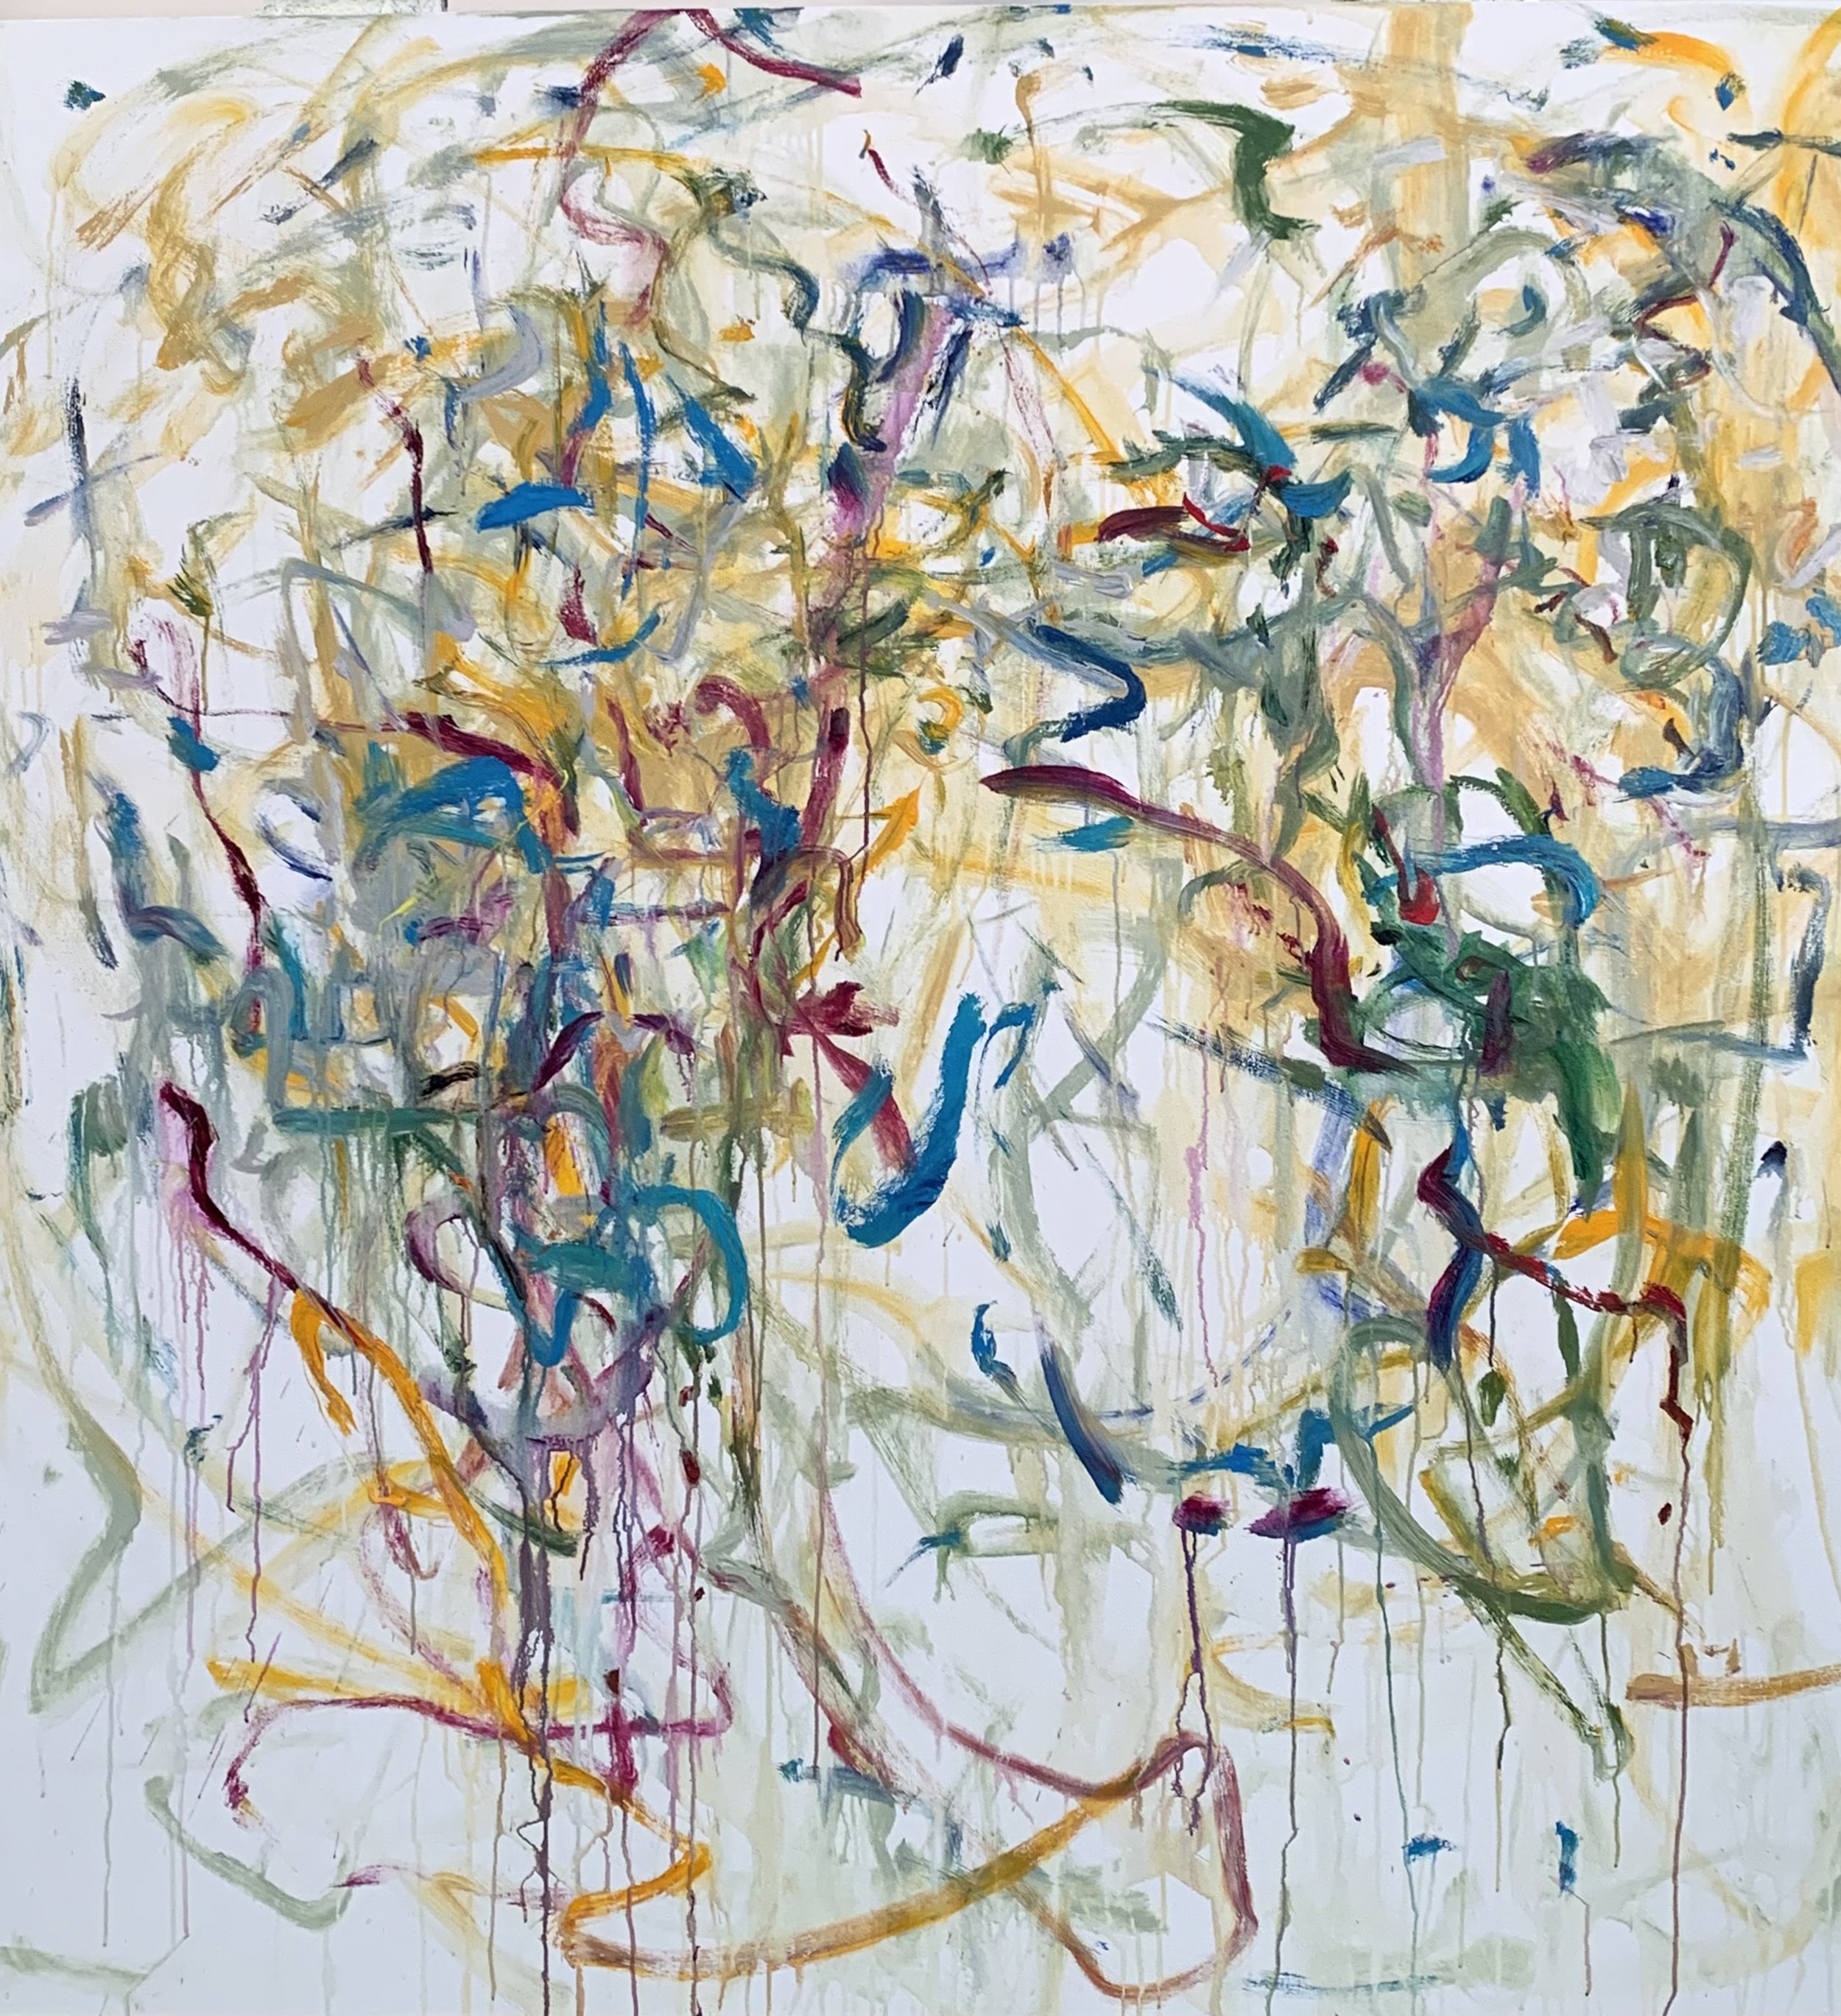 “Solstice’22 /Opening No. 174,” acrylic on canvas, 72”x72”